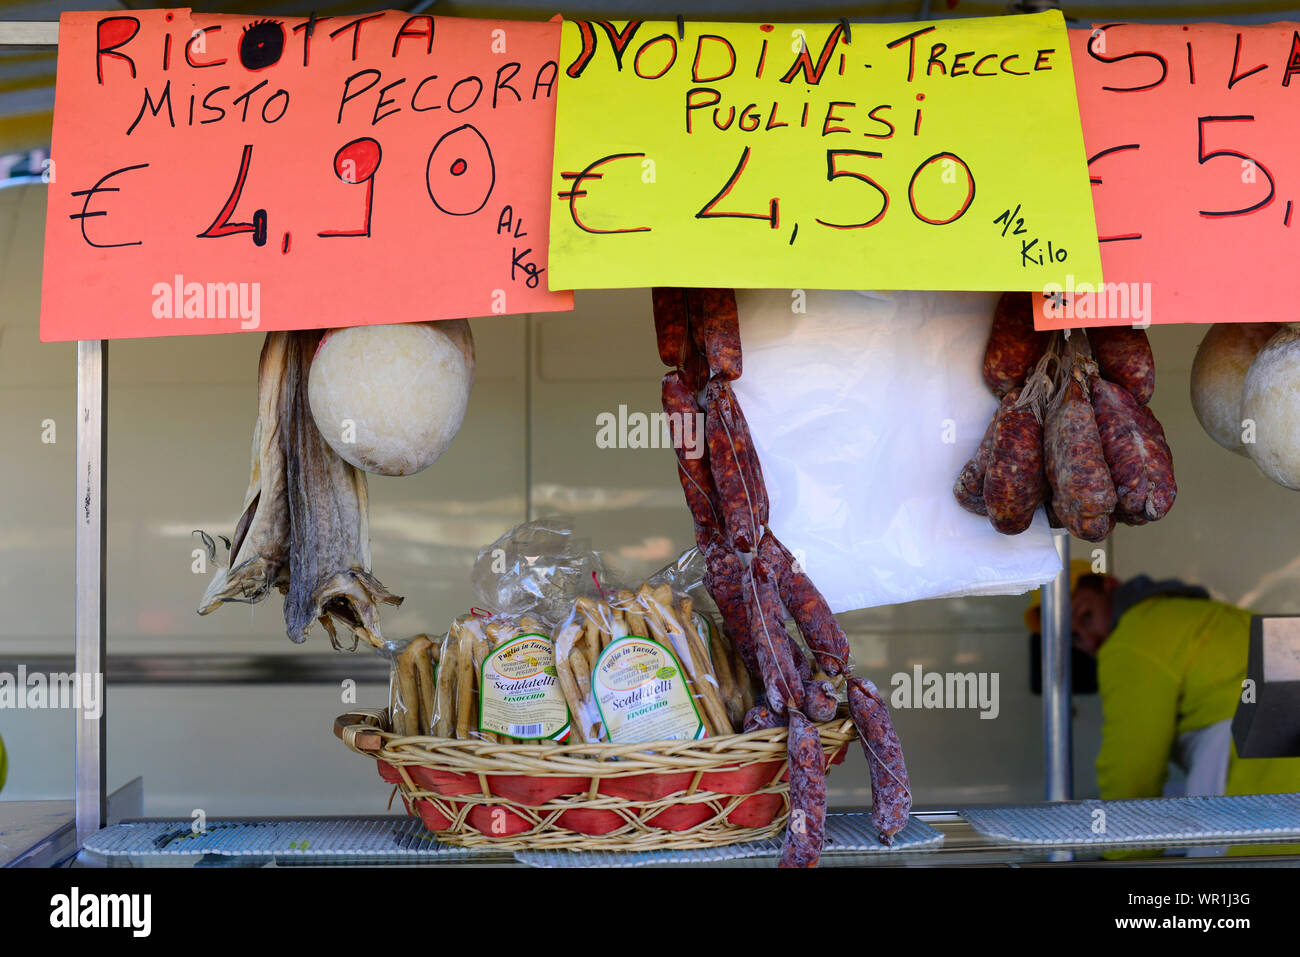 Cured meats and Ricotta cheese stall at the market in Bra, Italy. Stock Photo